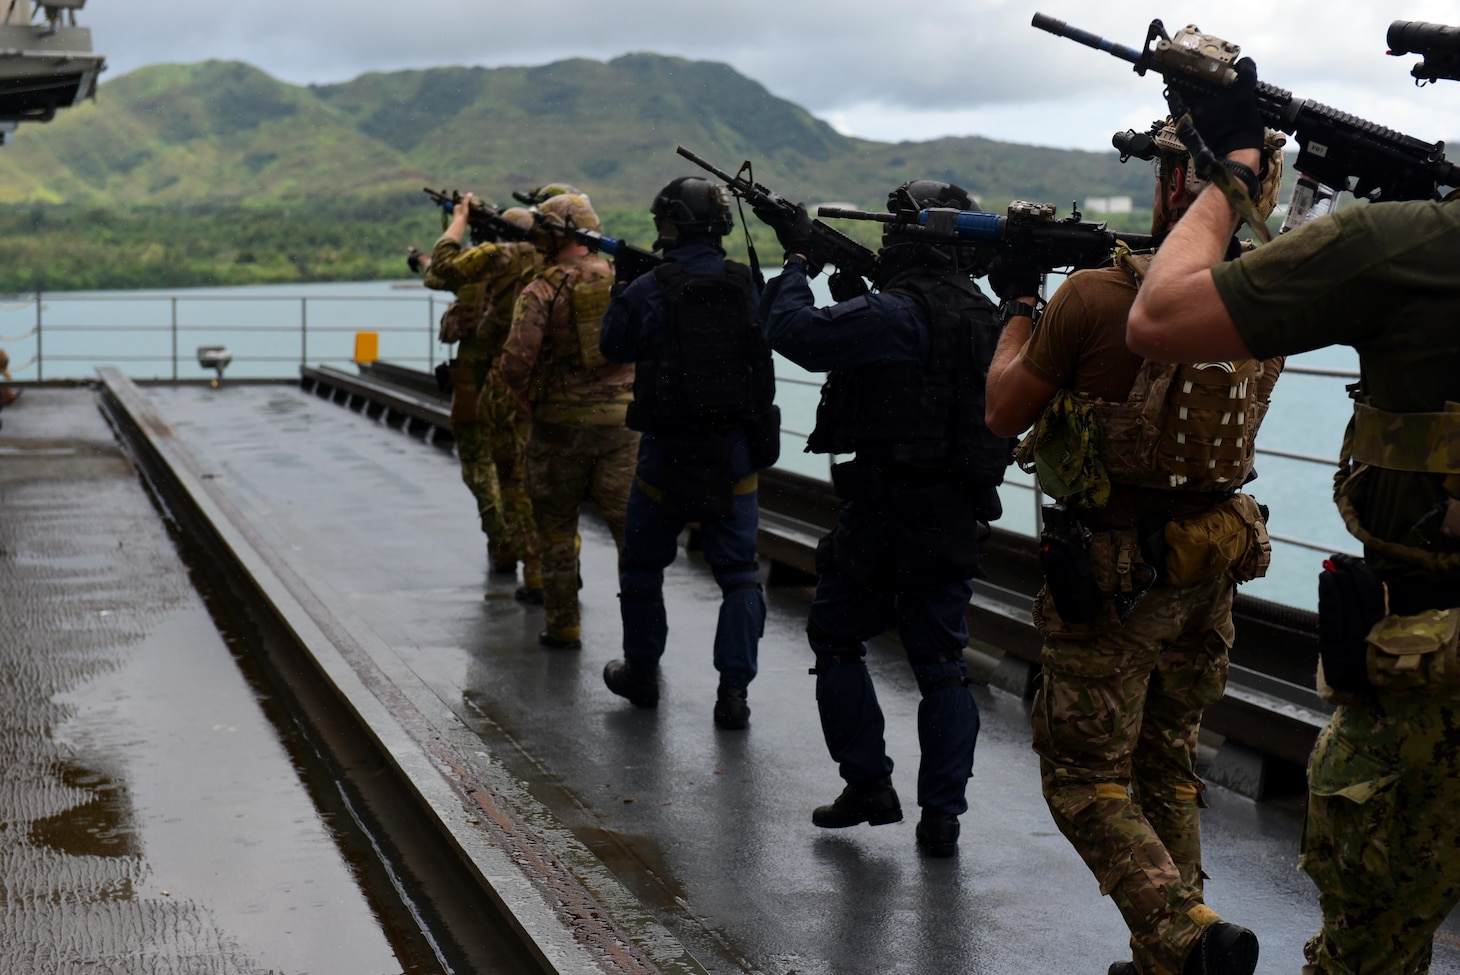 U.S. Naval special warfare operators and Japan Maritime Self-Defense Force sailors train aboard USS Frank Cable (AS-40) during MALABAR 2021.